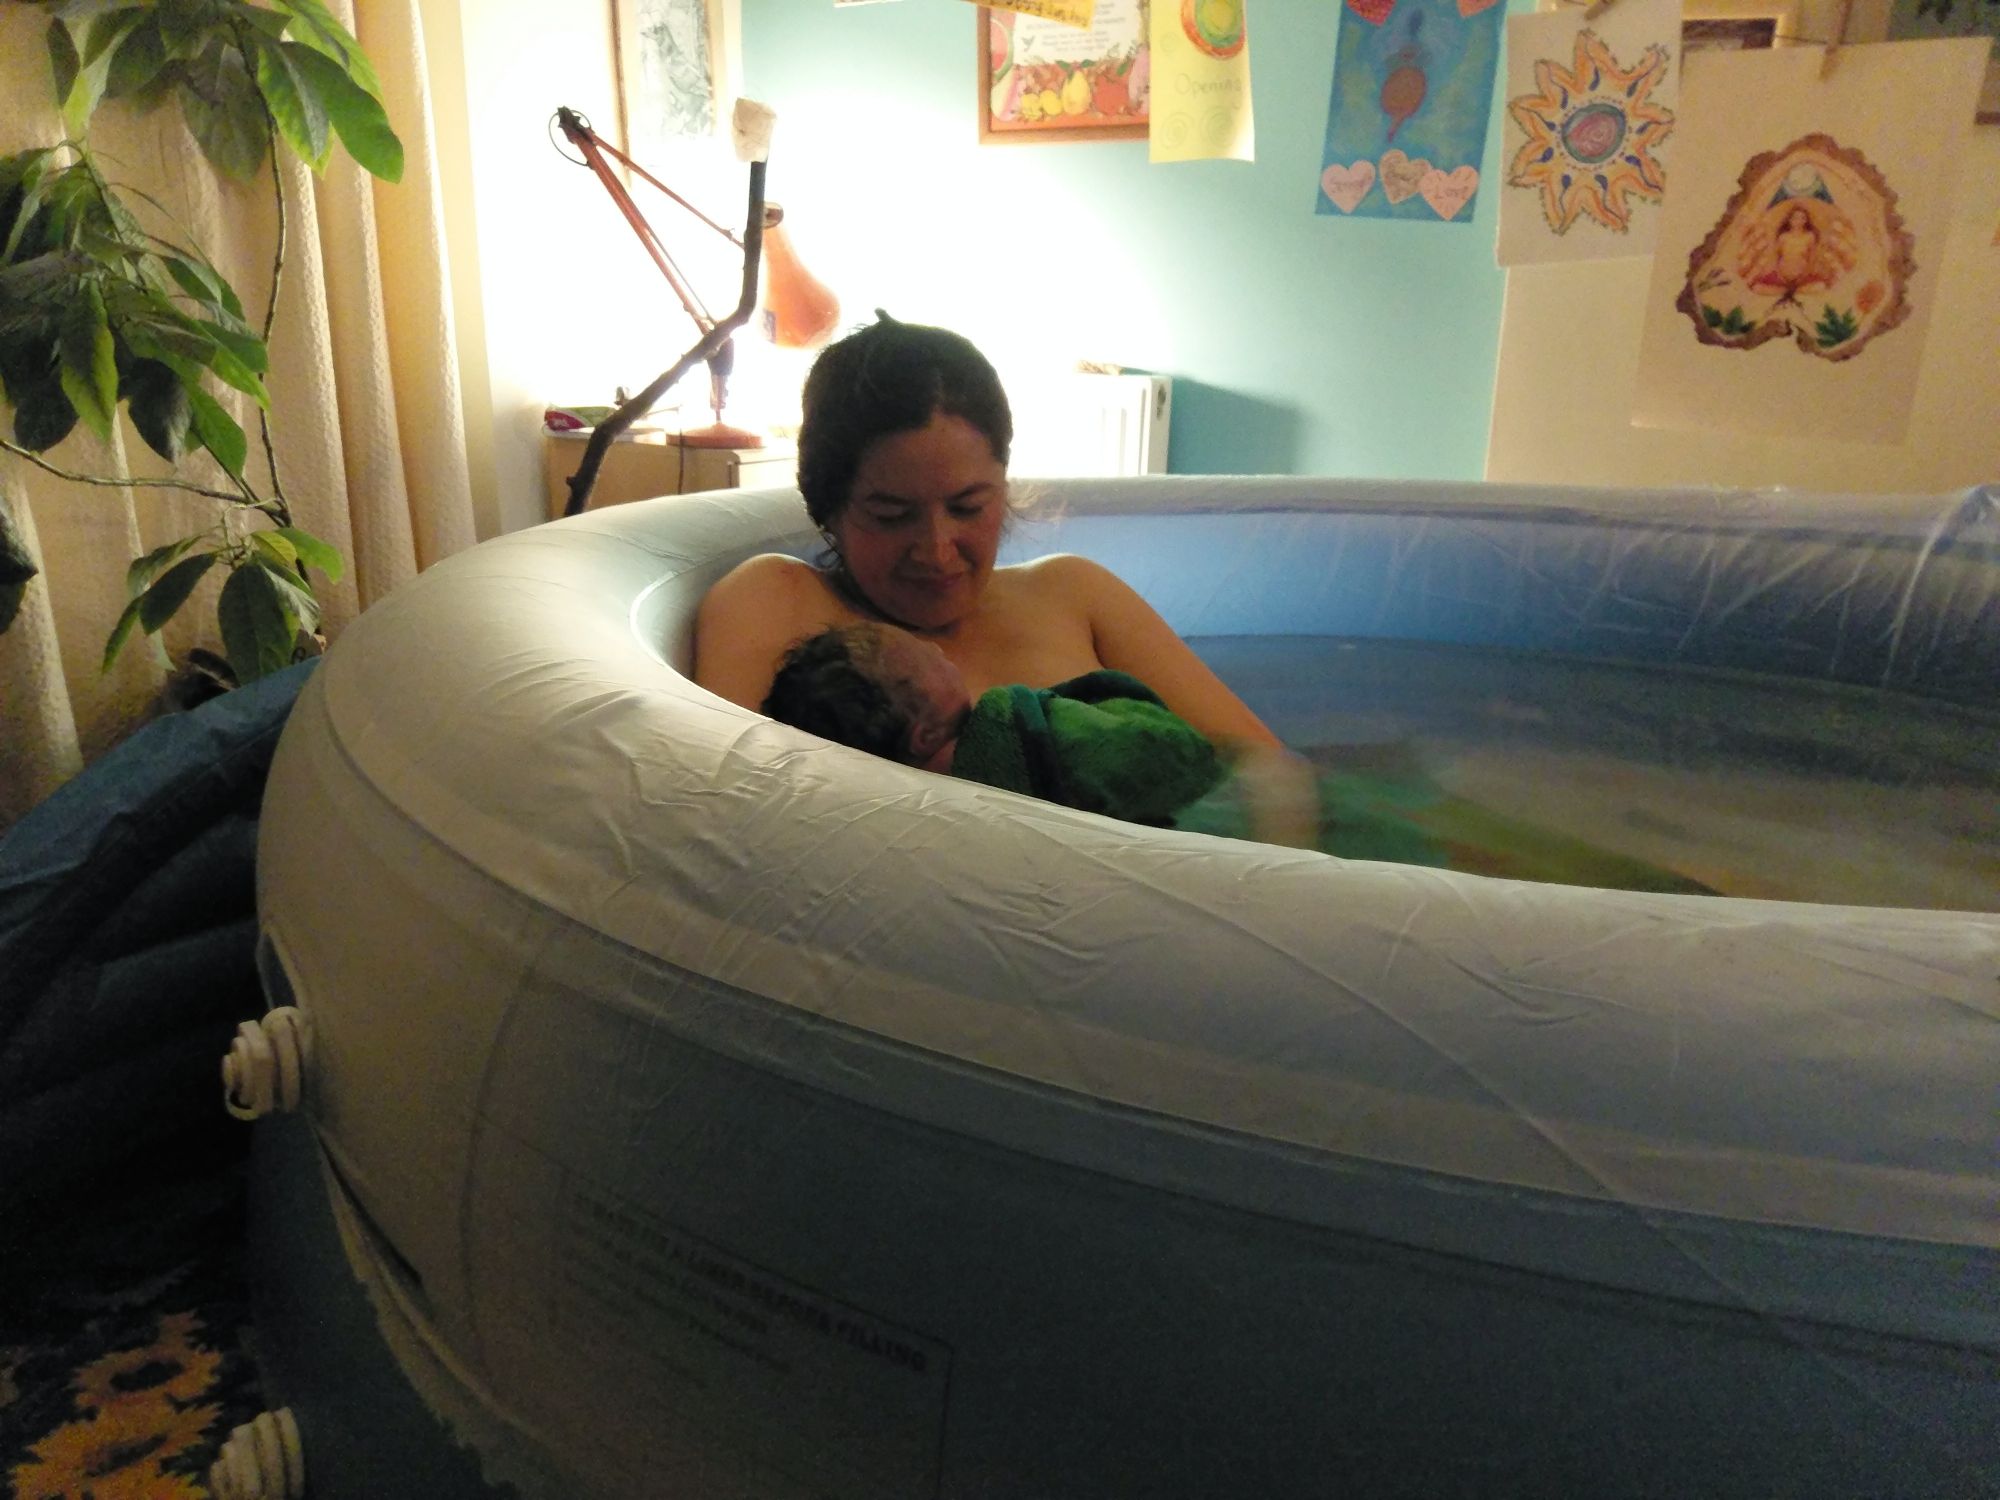 A woman sits in a birth pool and gazes lovingly down at her new baby.